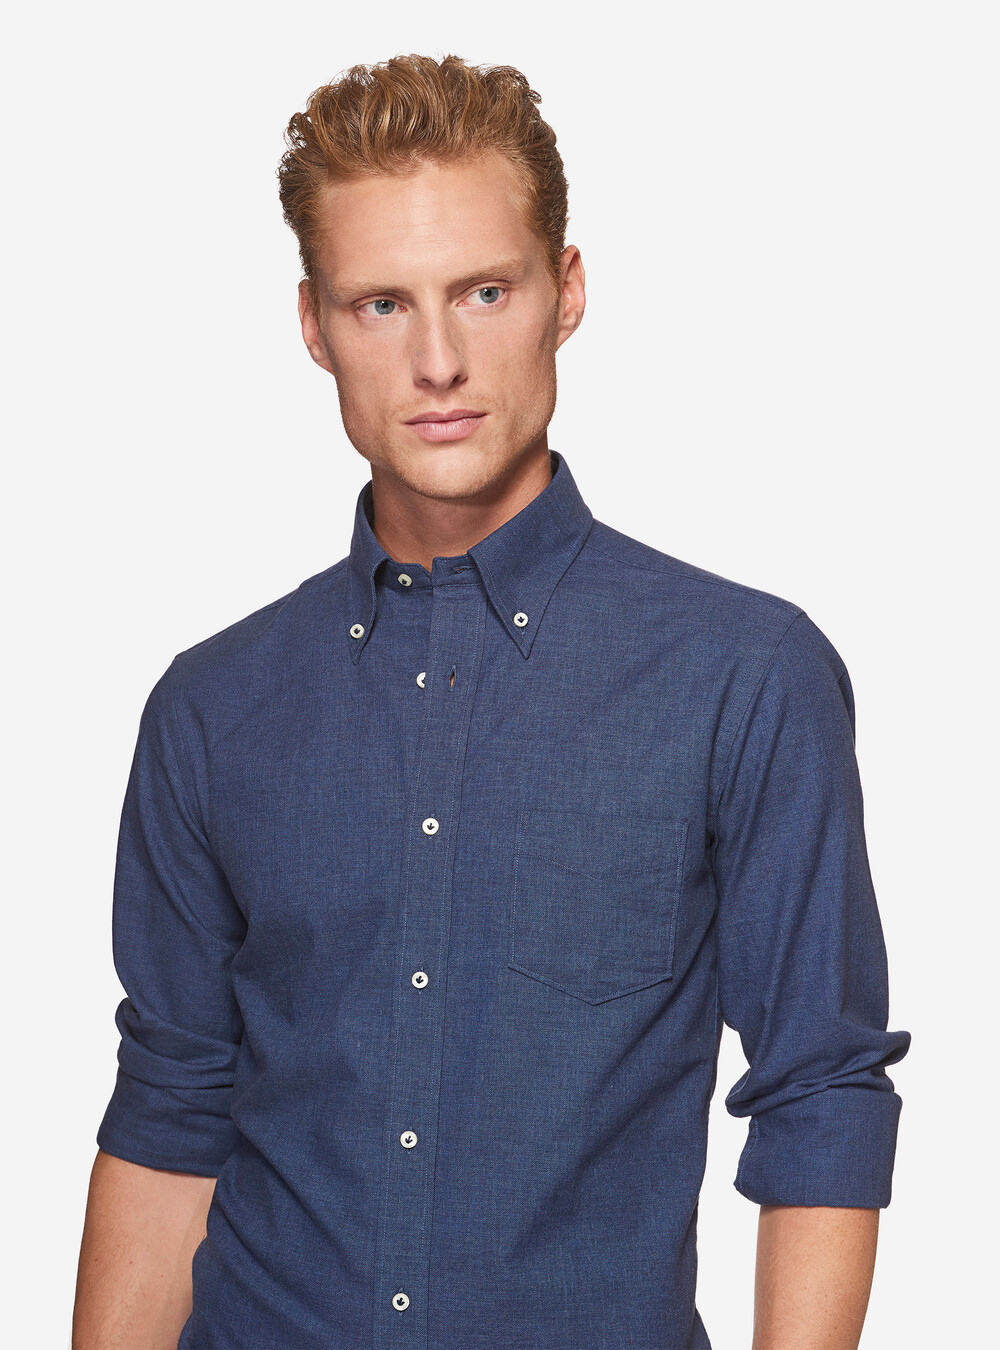 Shirt with button down collar and flannel cotton small pocket